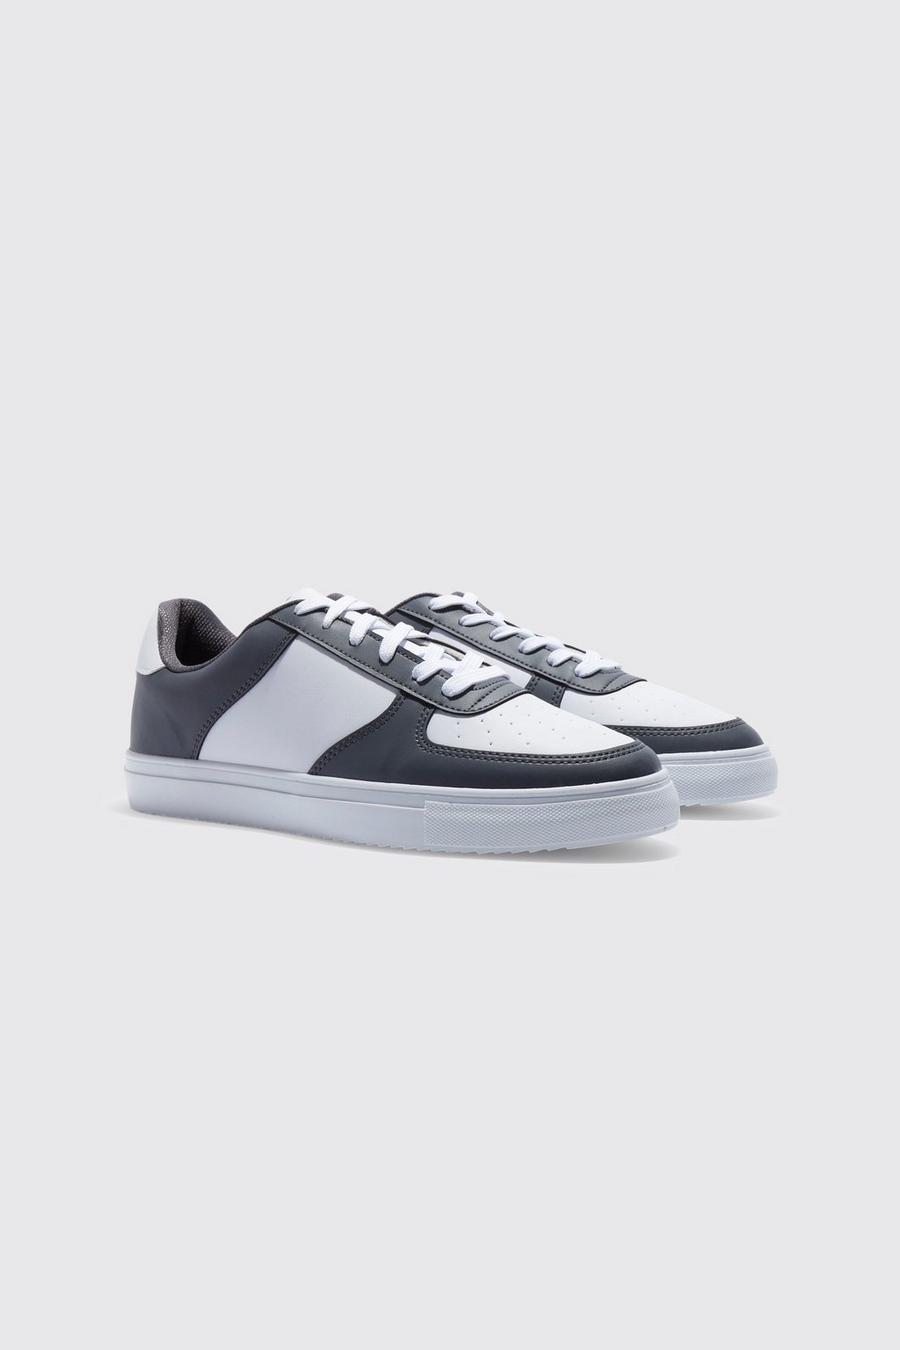 Charcoal grey Contrast Panel Trainer